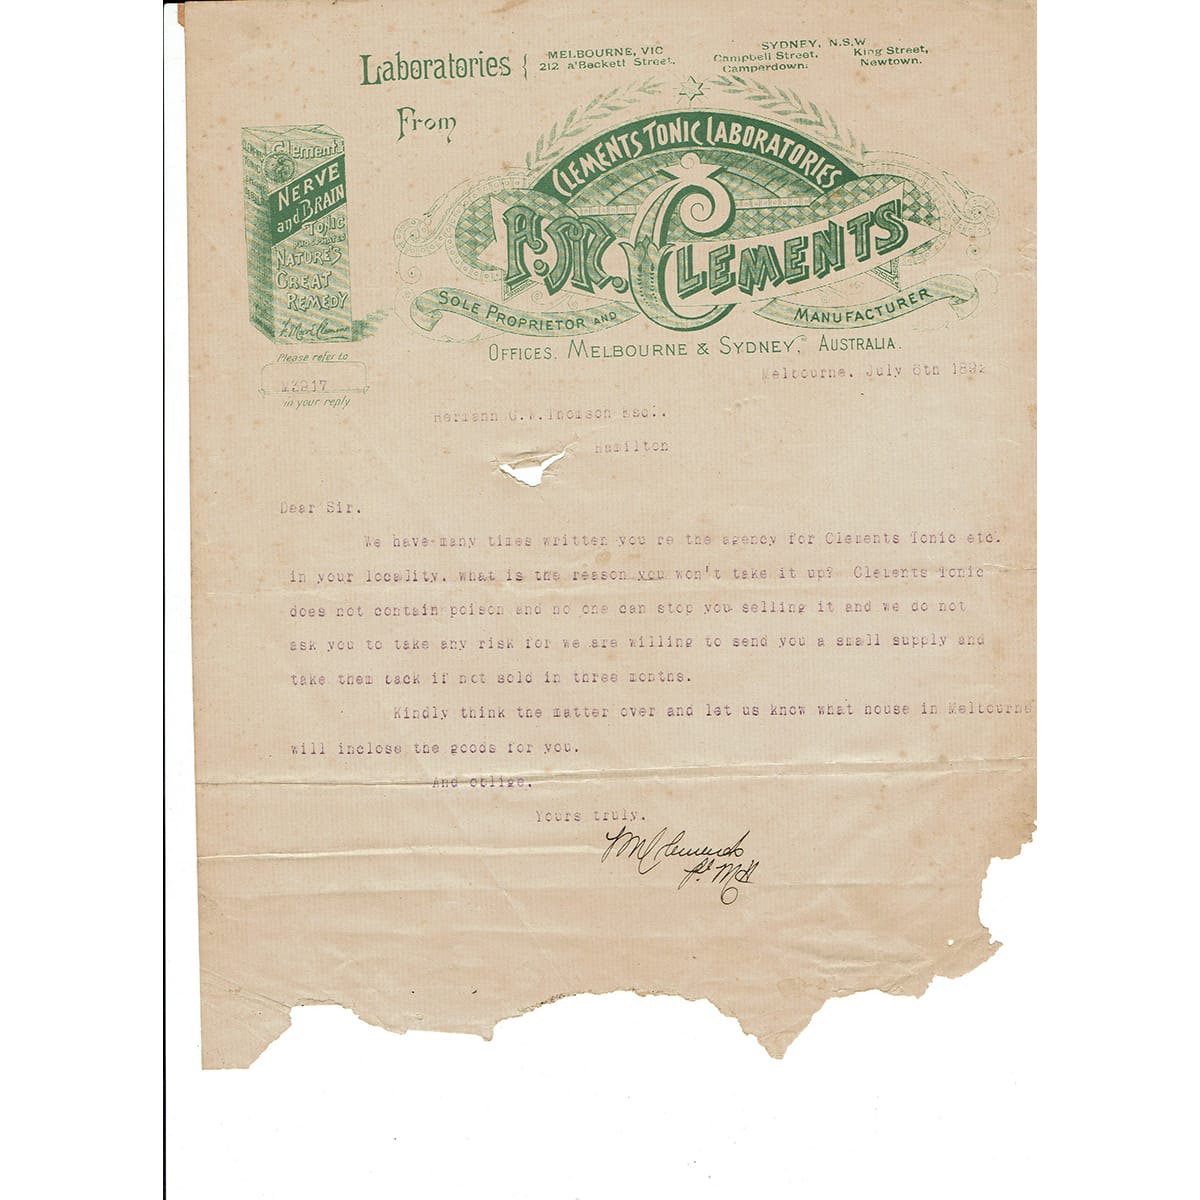 Invoice/Letterhead. Clements Tonic Laboratories. 1892. (Victoria & New South Wales)